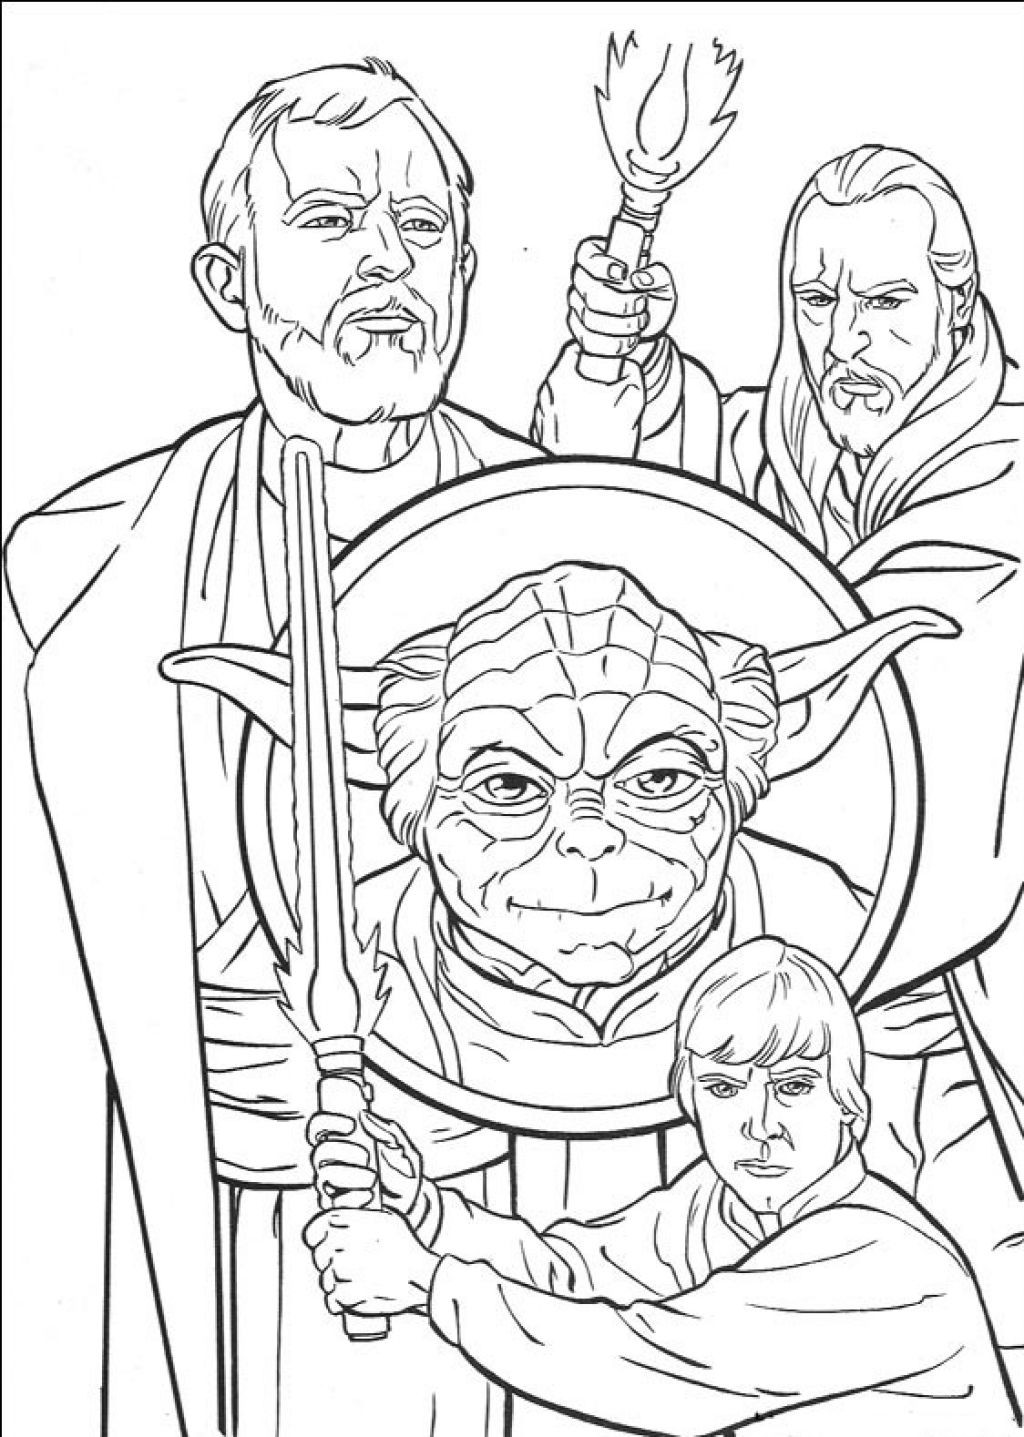 Free Coloring Sheets For Star Wars
 Star Wars Coloring Pages Free Printable Star Wars